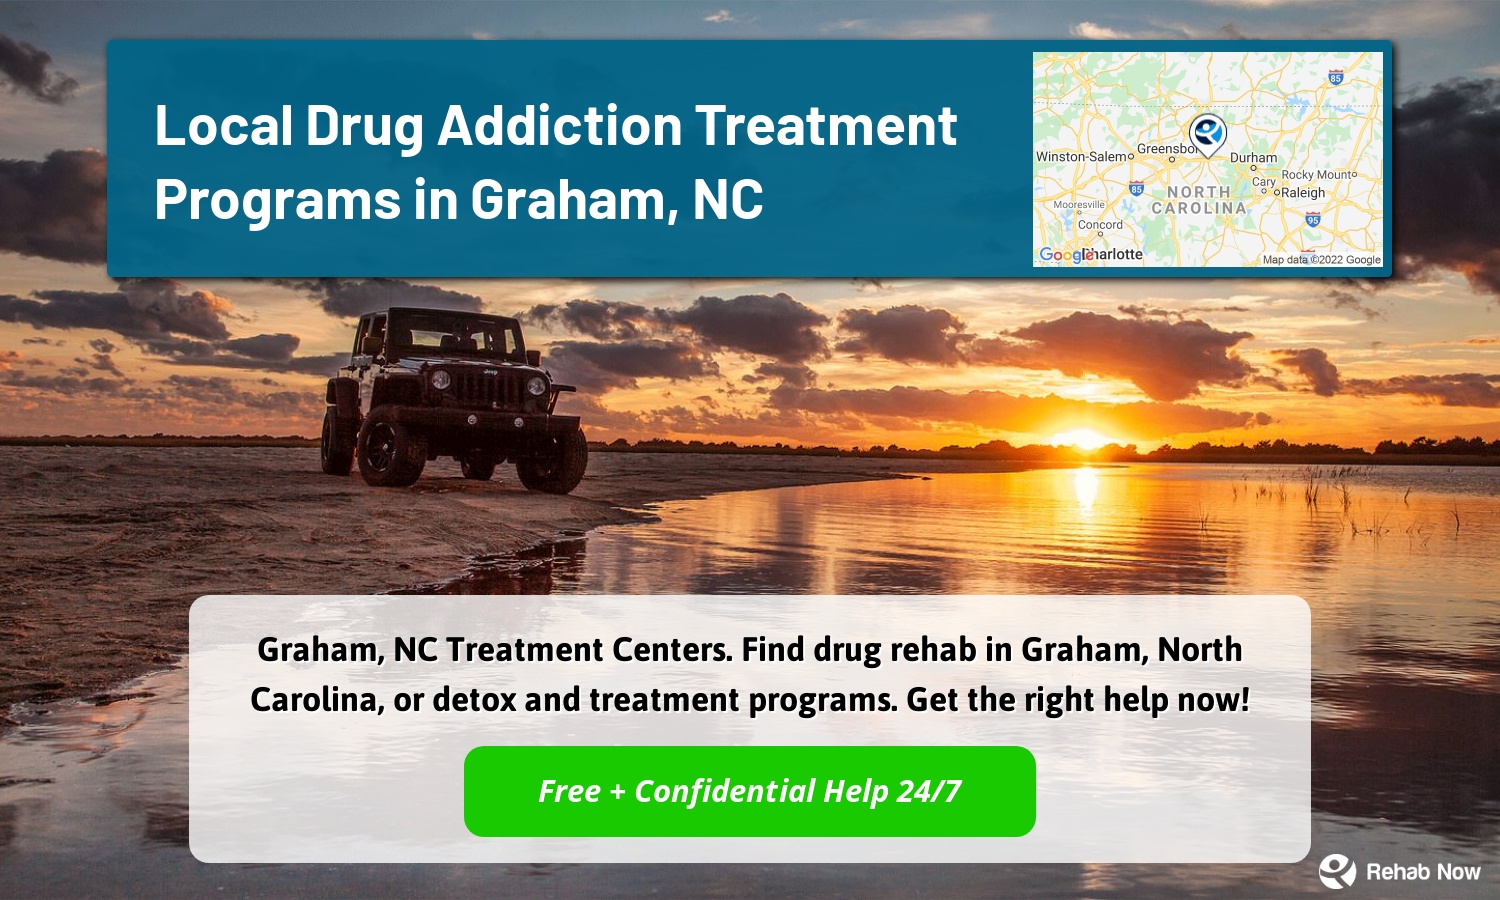 Graham, NC Treatment Centers. Find drug rehab in Graham, North Carolina, or detox and treatment programs. Get the right help now!